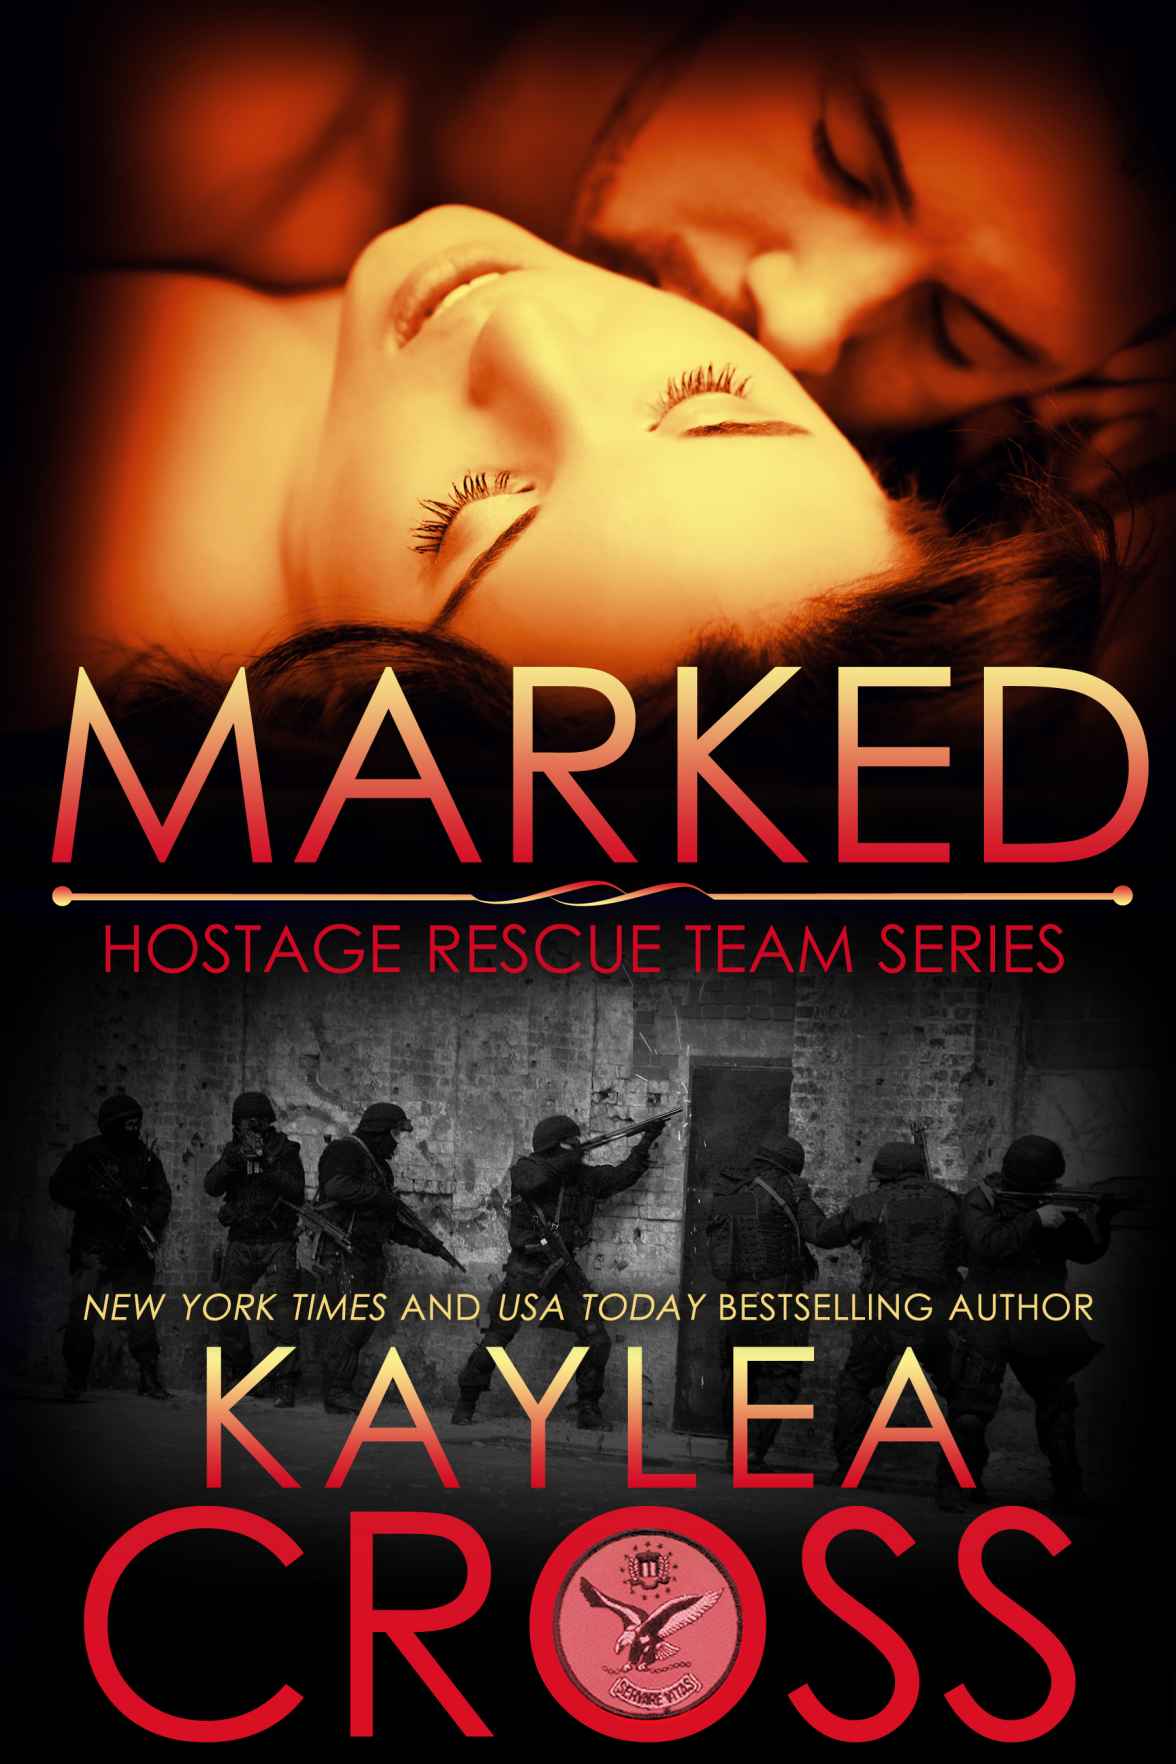 Marked (Hostage Rescue Team Series) by Kaylea Cross